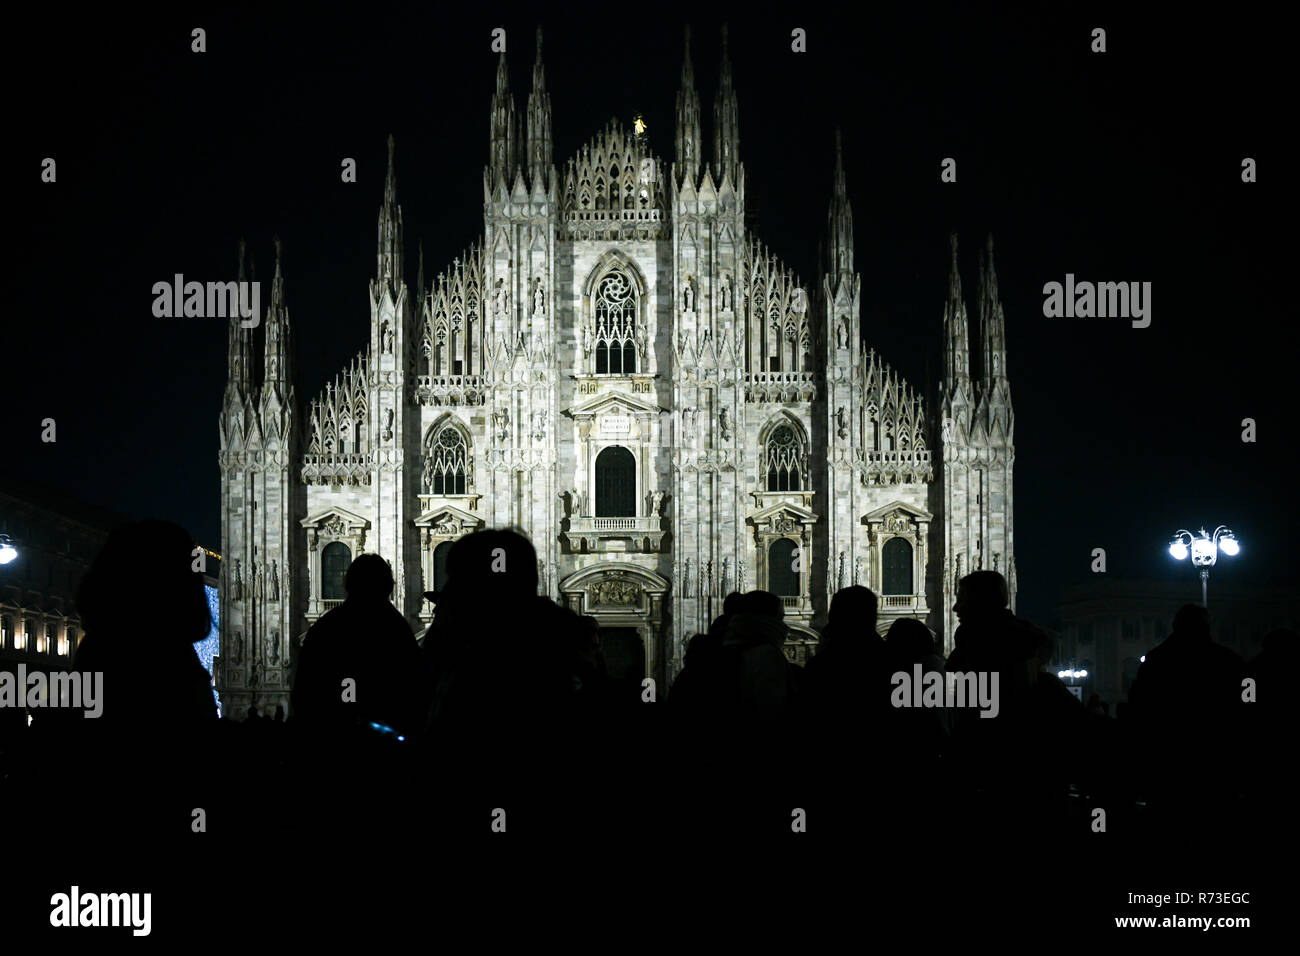 Christmas in Milan, Italy. Silhouette of people in front of the Duomo cathedral facade illuminated at night. Stock Photo